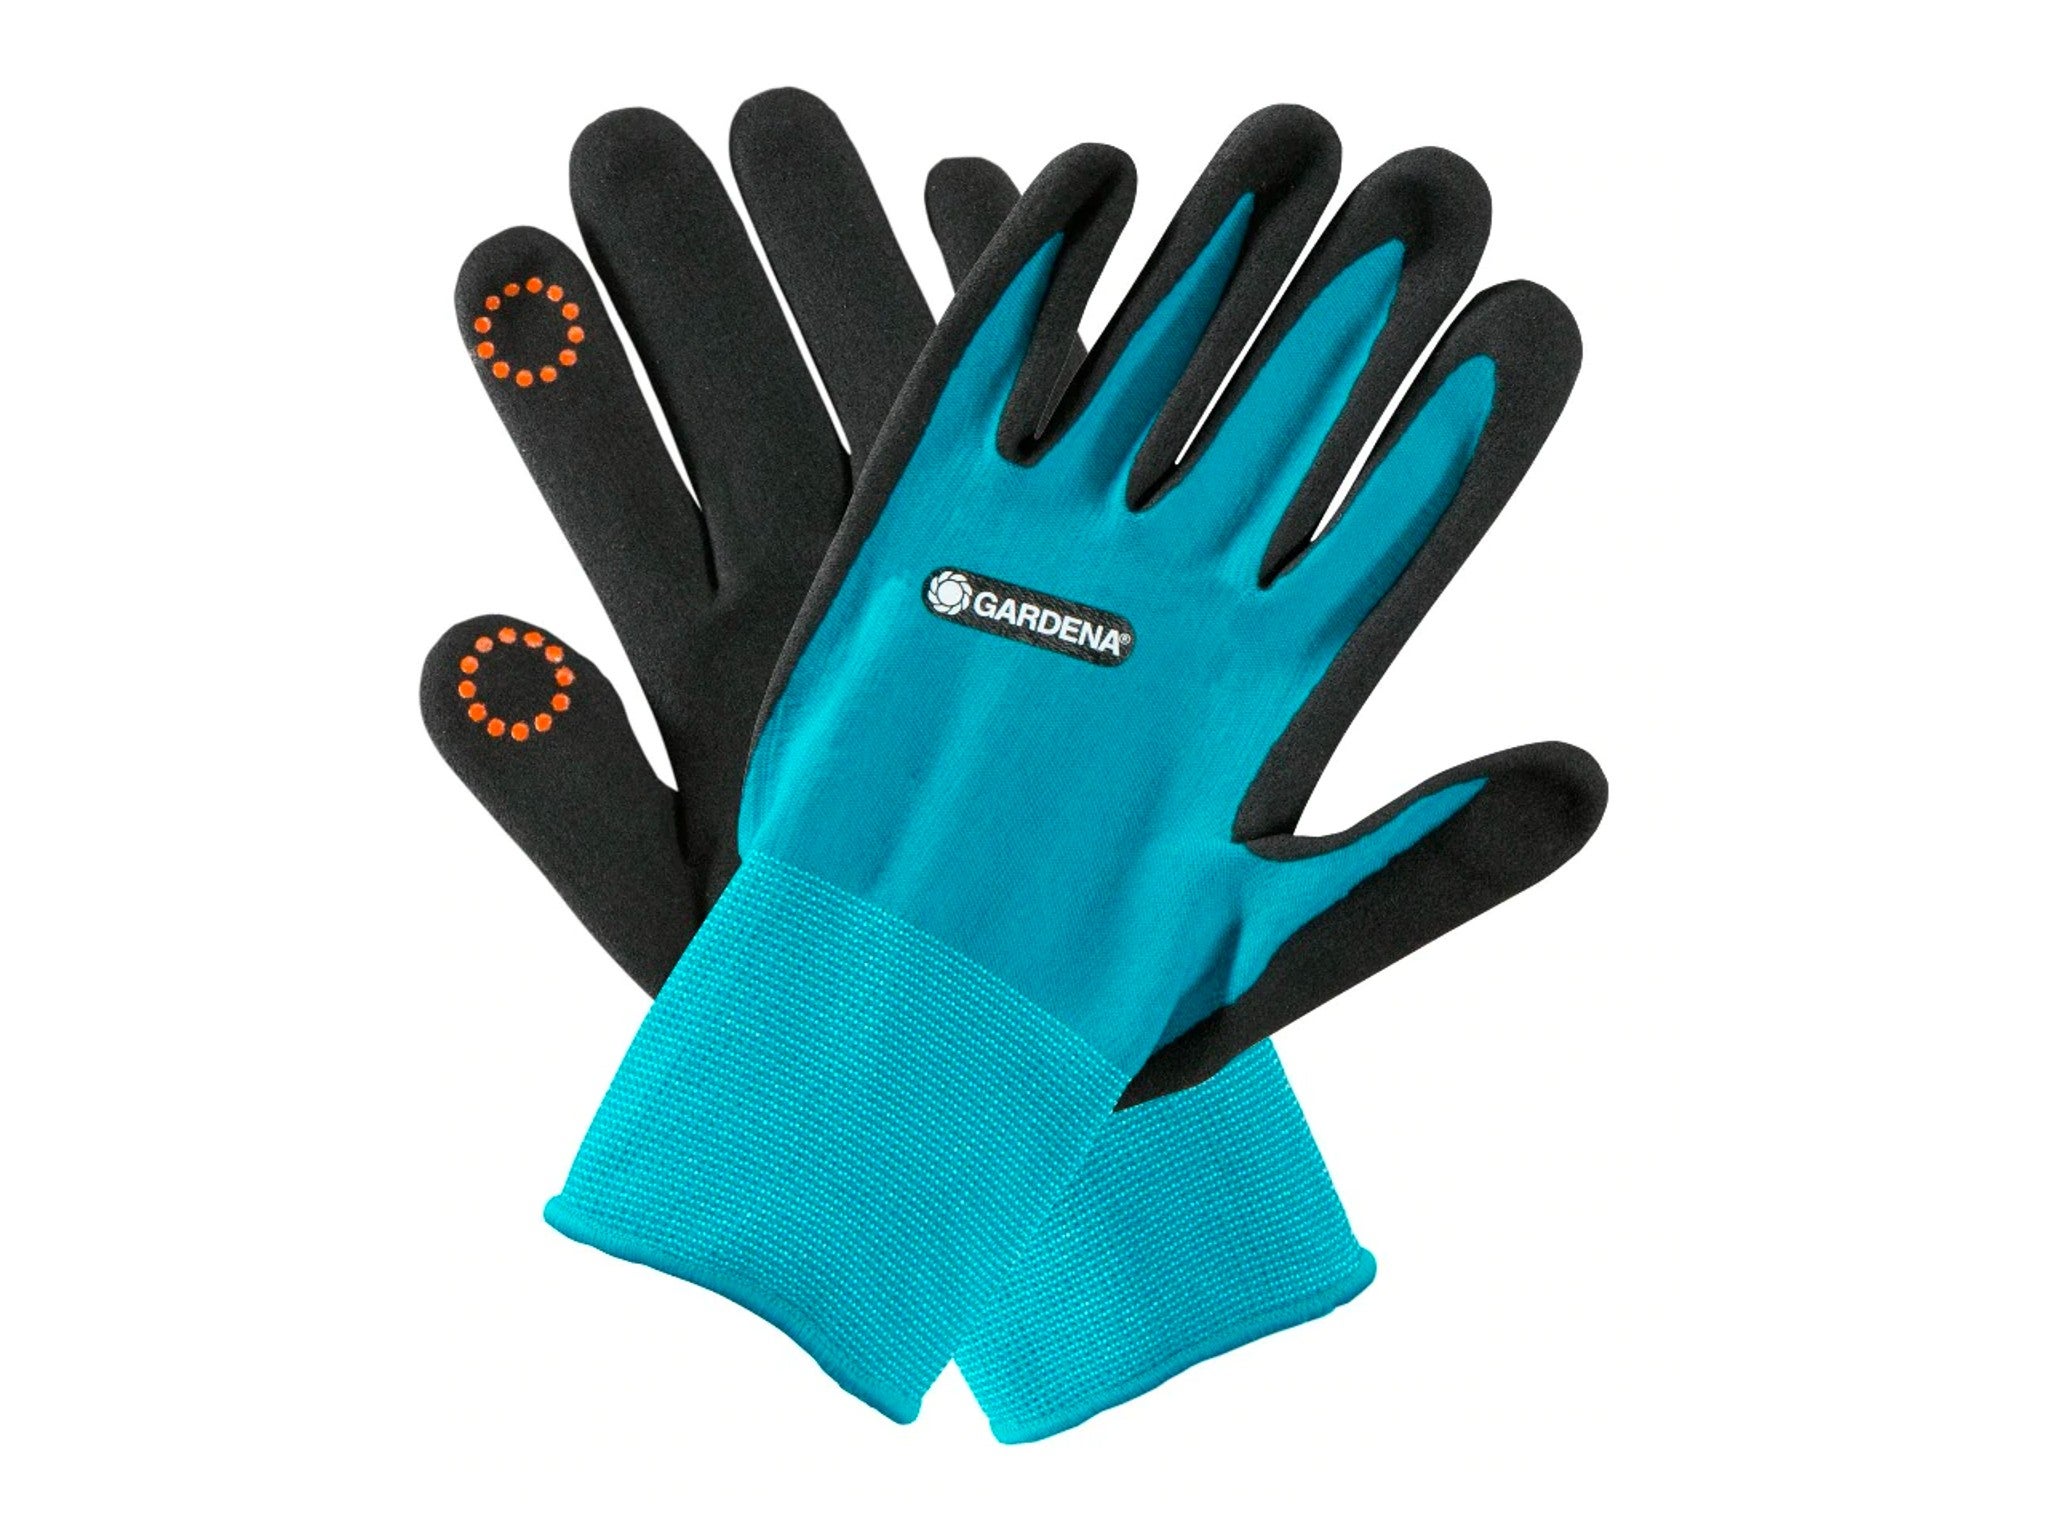 waterproof perfect digging protect your hands from dirt and cuts puncture-resistant and easy to clean Garden gloves planting and repair tools 